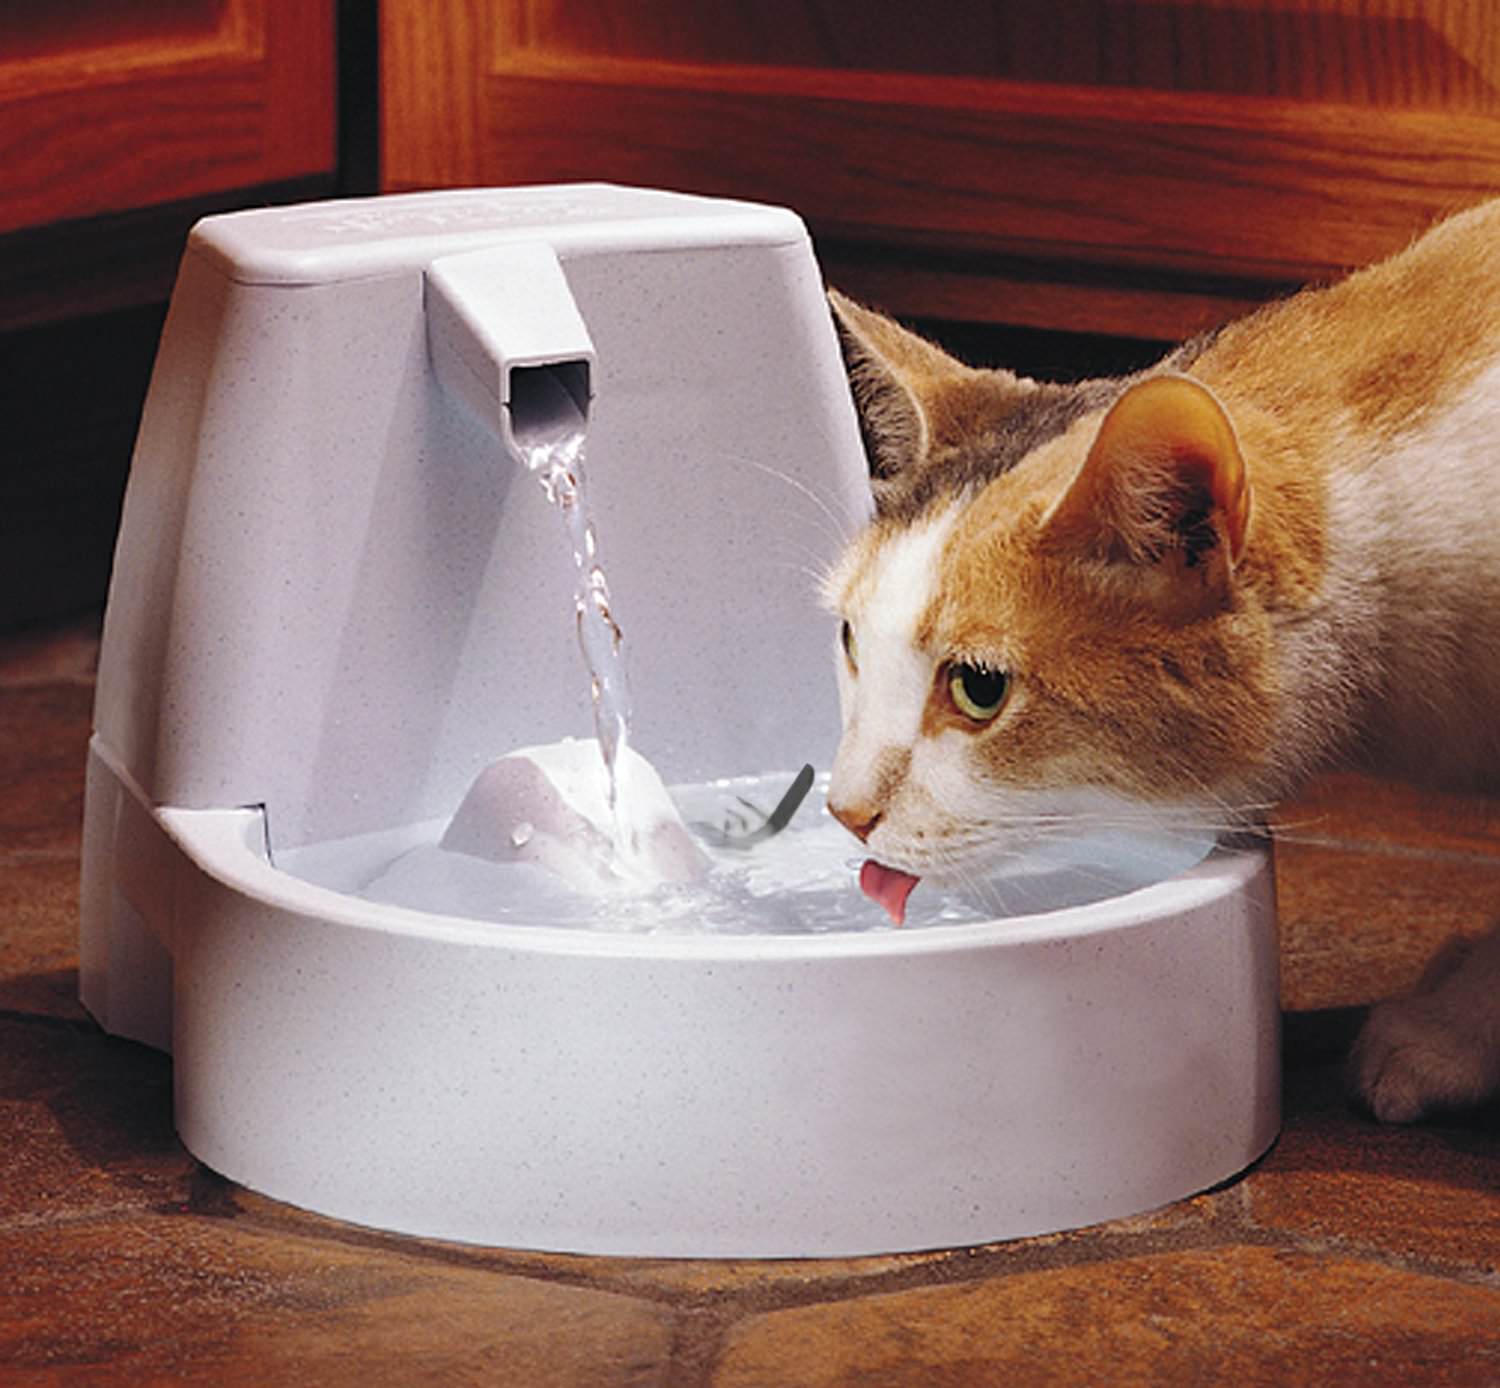 7 Ways To Get Your Cat To Drink More Water